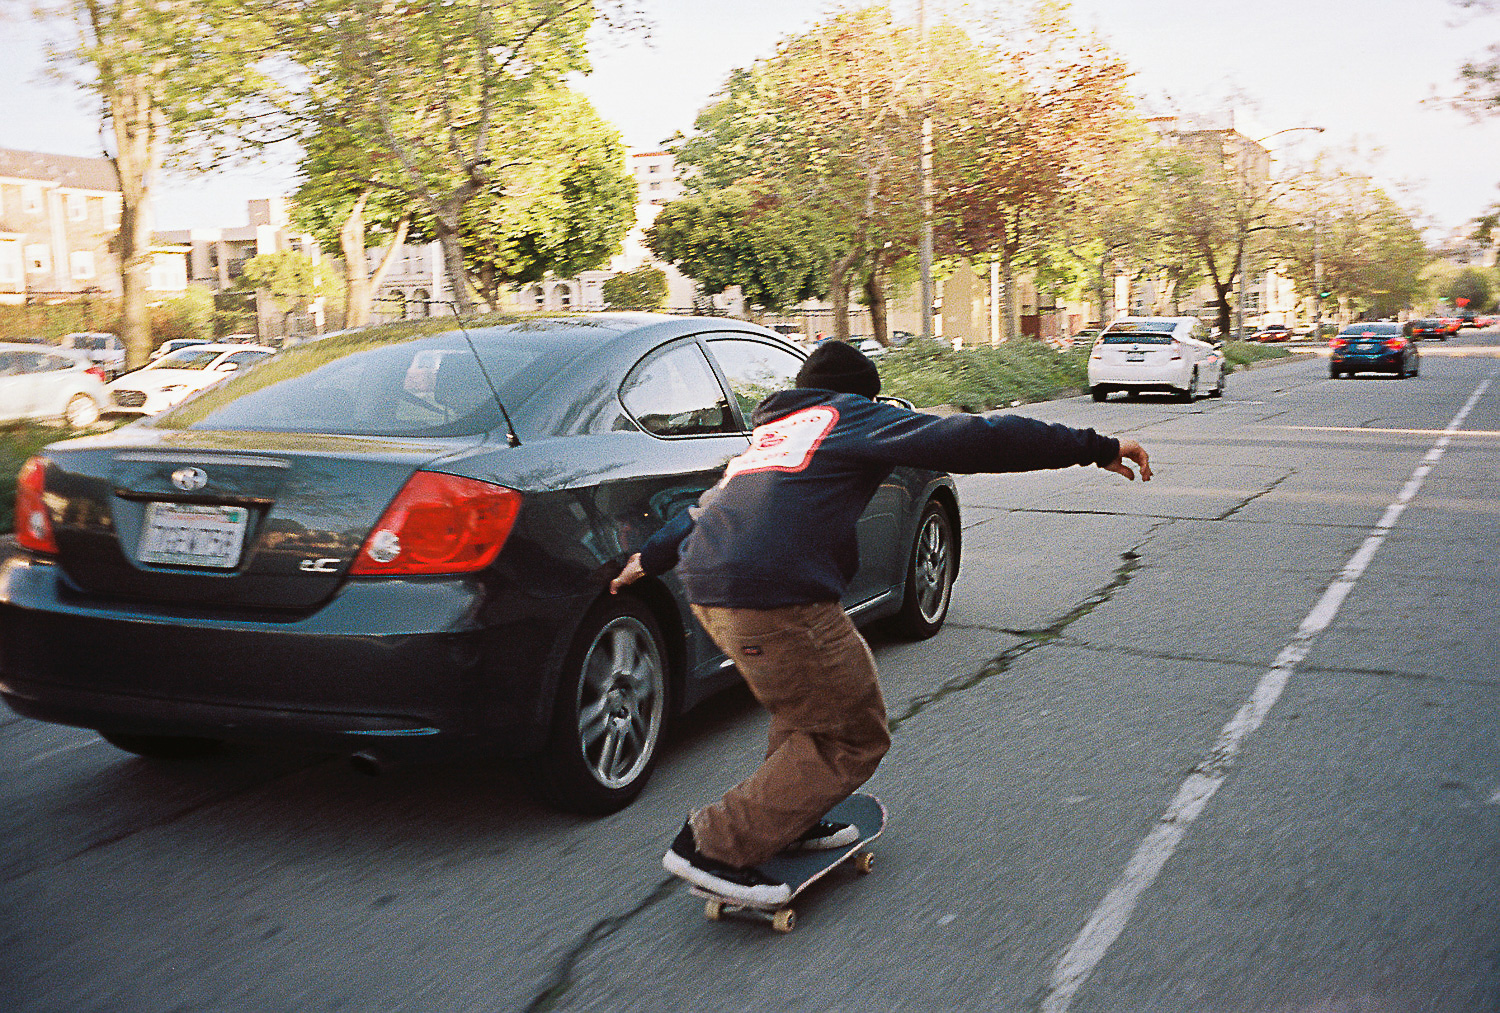 Meet GX1000, the Fastest, Most Fearless Crew in Skateboarding